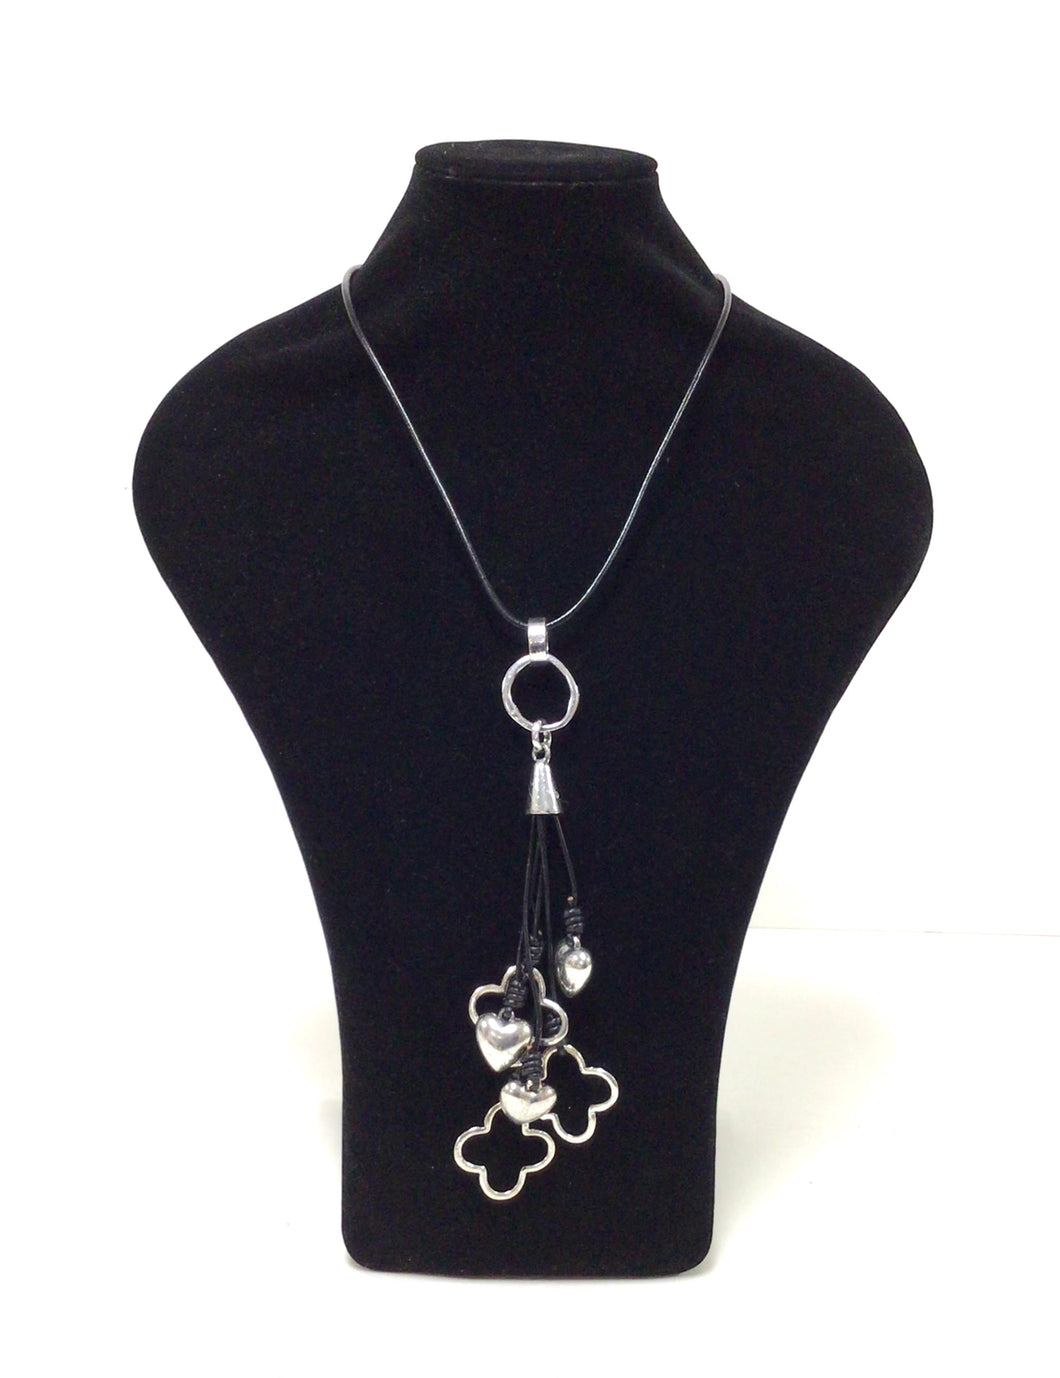 Hearts and Quatrefoils pendant necklace. The pendant has 3 silver-tone puffed hearts and 3 silver-tone quatrefoils that hang on varying lengths of black leather-like cords. The cords are attached to a silver-tone cap that hangs from the bottom of the neck cord. The necklace can easily slip over the head but does feature a lobster claw clasp with a 2